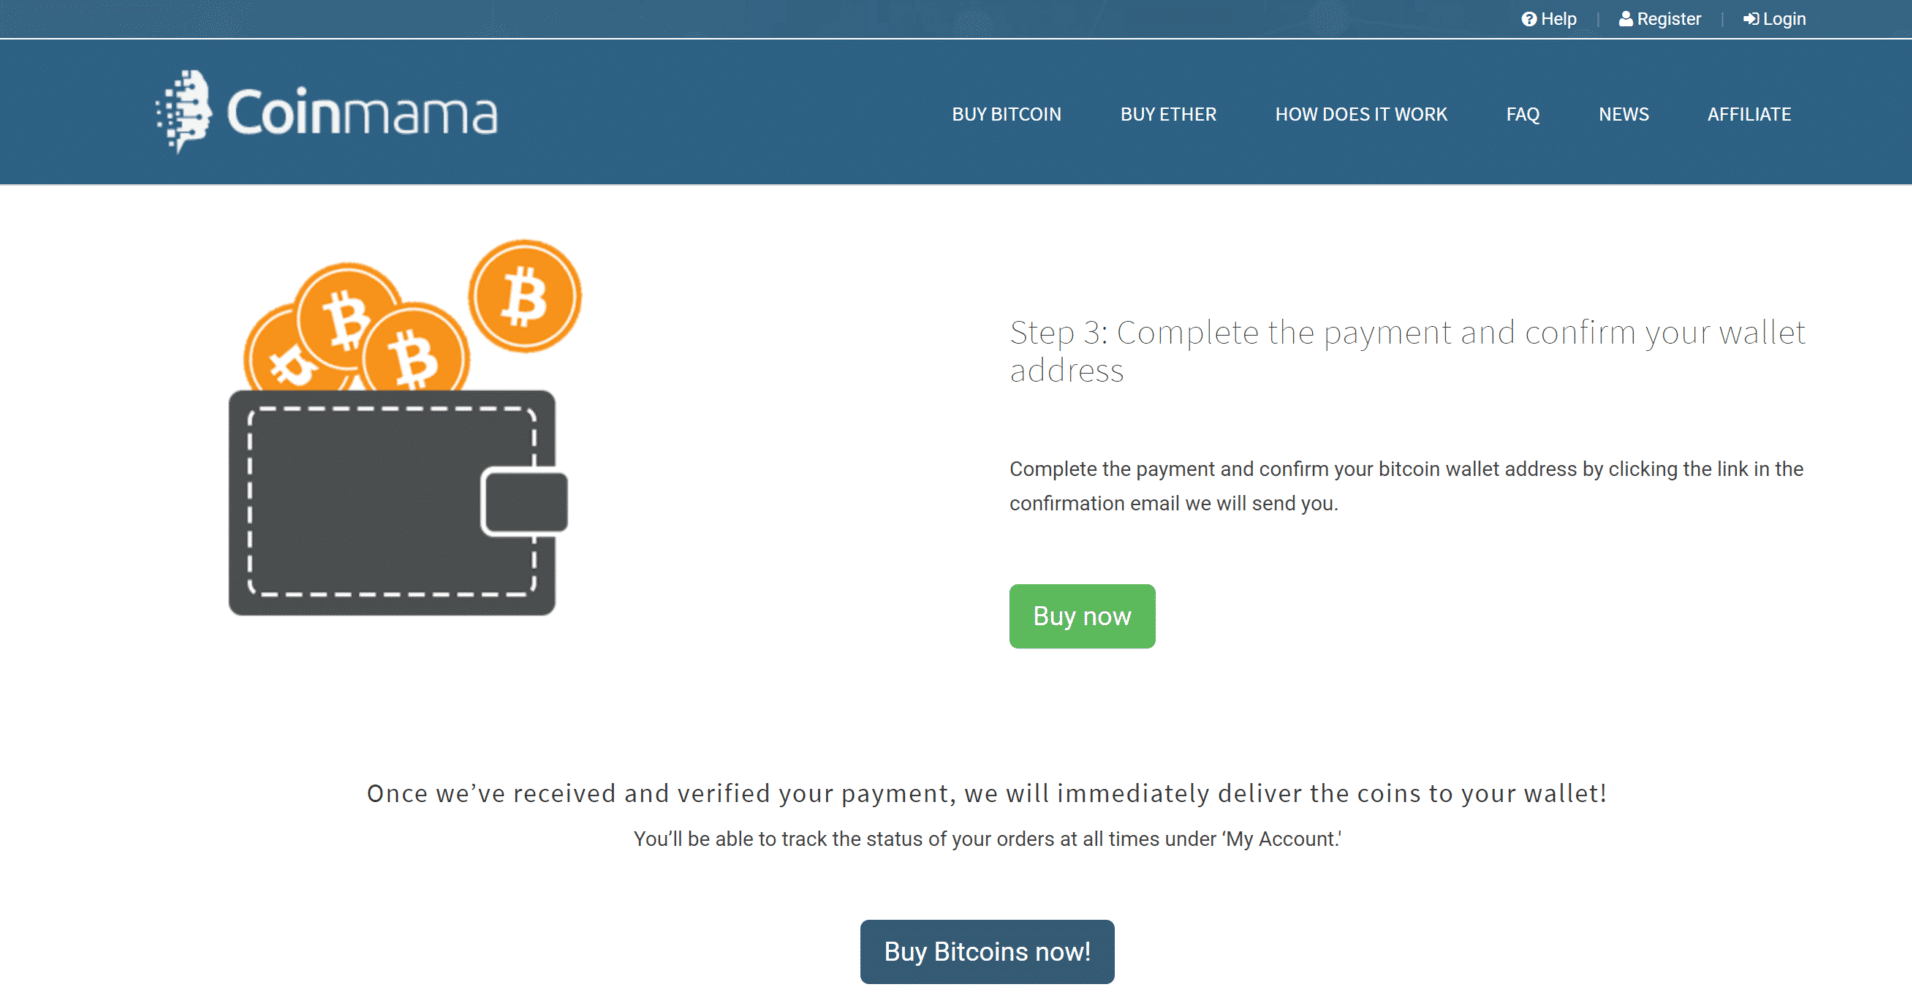 Welcome to Coinmama!